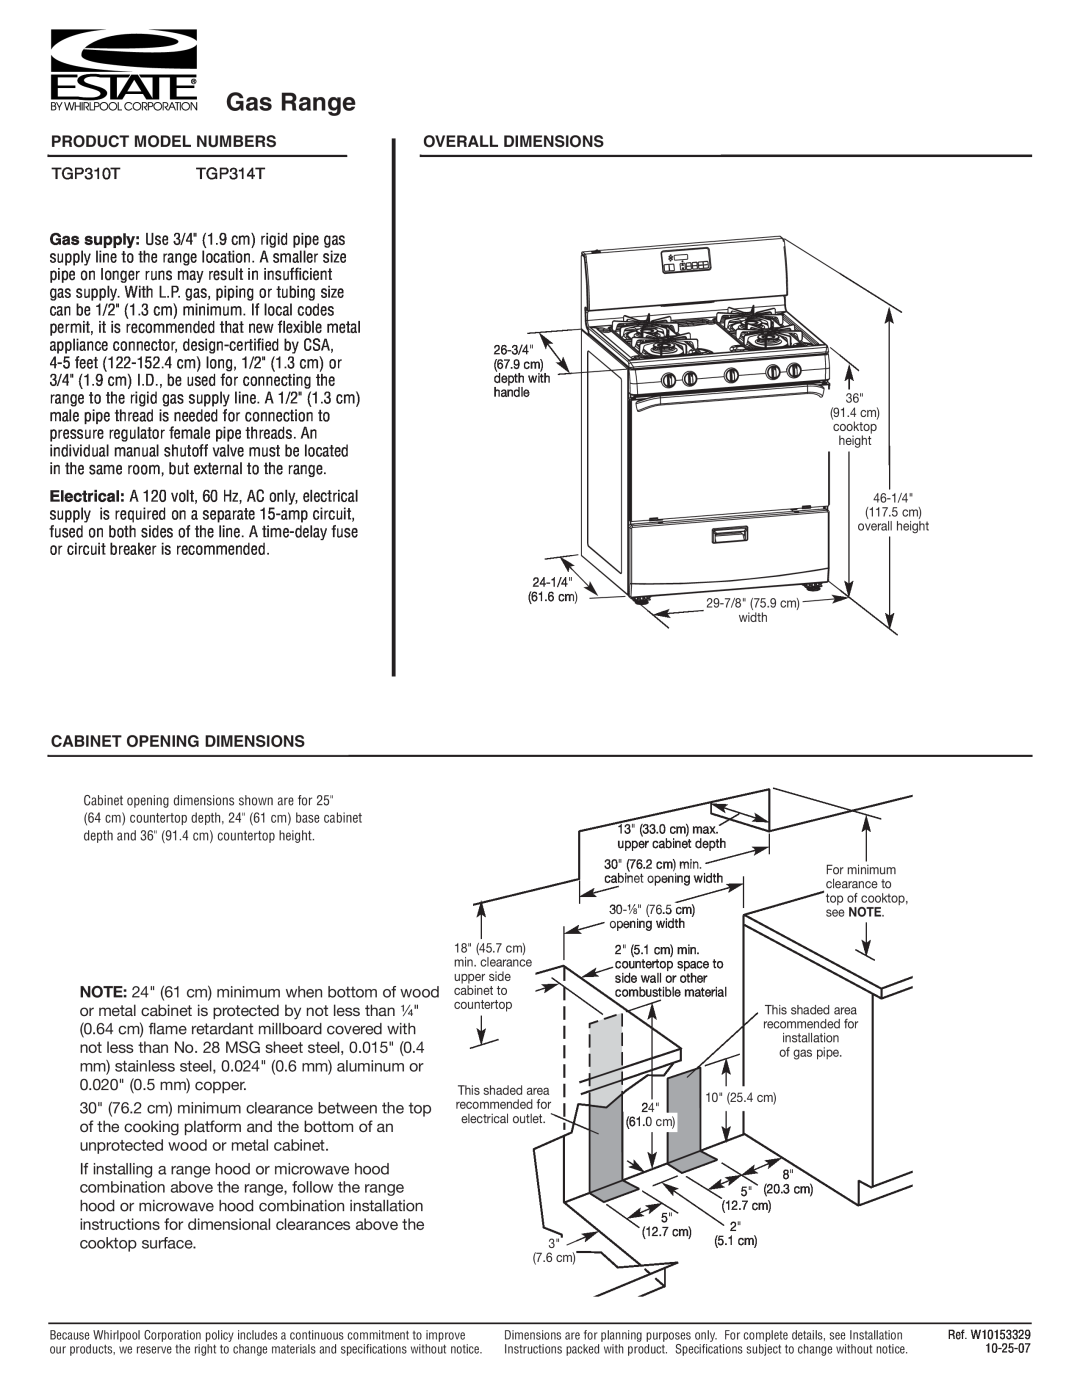 Estate dimensions Gas Range, Product Model Numbers, TGP310TTGP314T, Overall Dimensions, Cabinet Opening Dimensions 